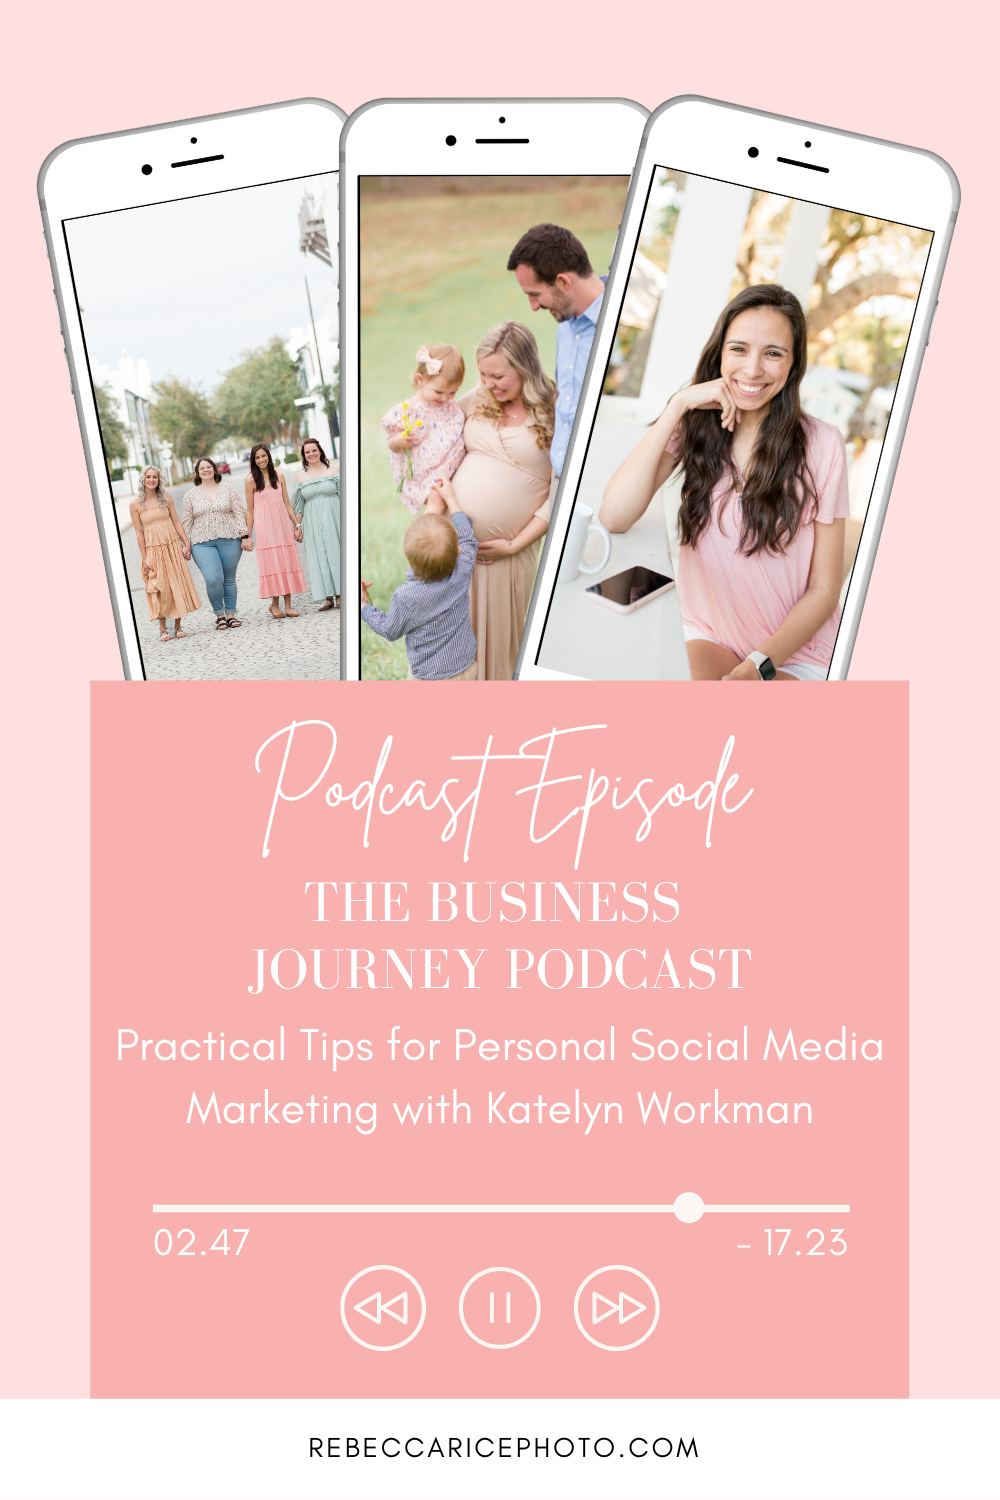 Practical Tips for Personal Social Media Marketing with Katelyn Workman